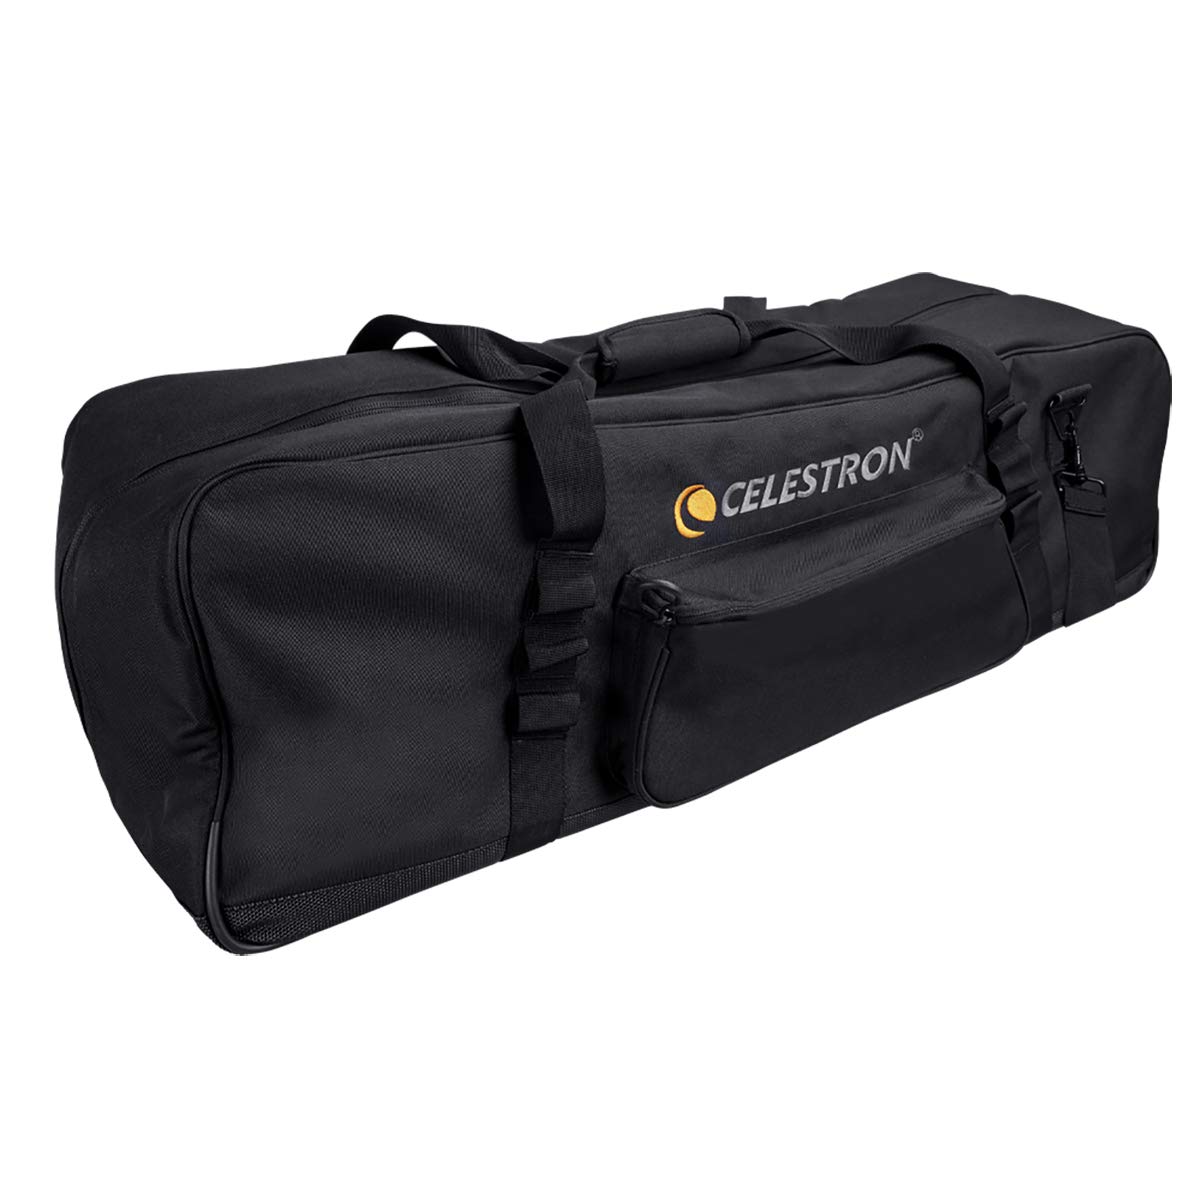 Celestron – 34” Tripod Bag – Storage & Carrying Case for Tripod & Accessories – Durable 900 denier construction – Thick foam walls – Internal straps to secure tripod – Padded arm strap for easy carry